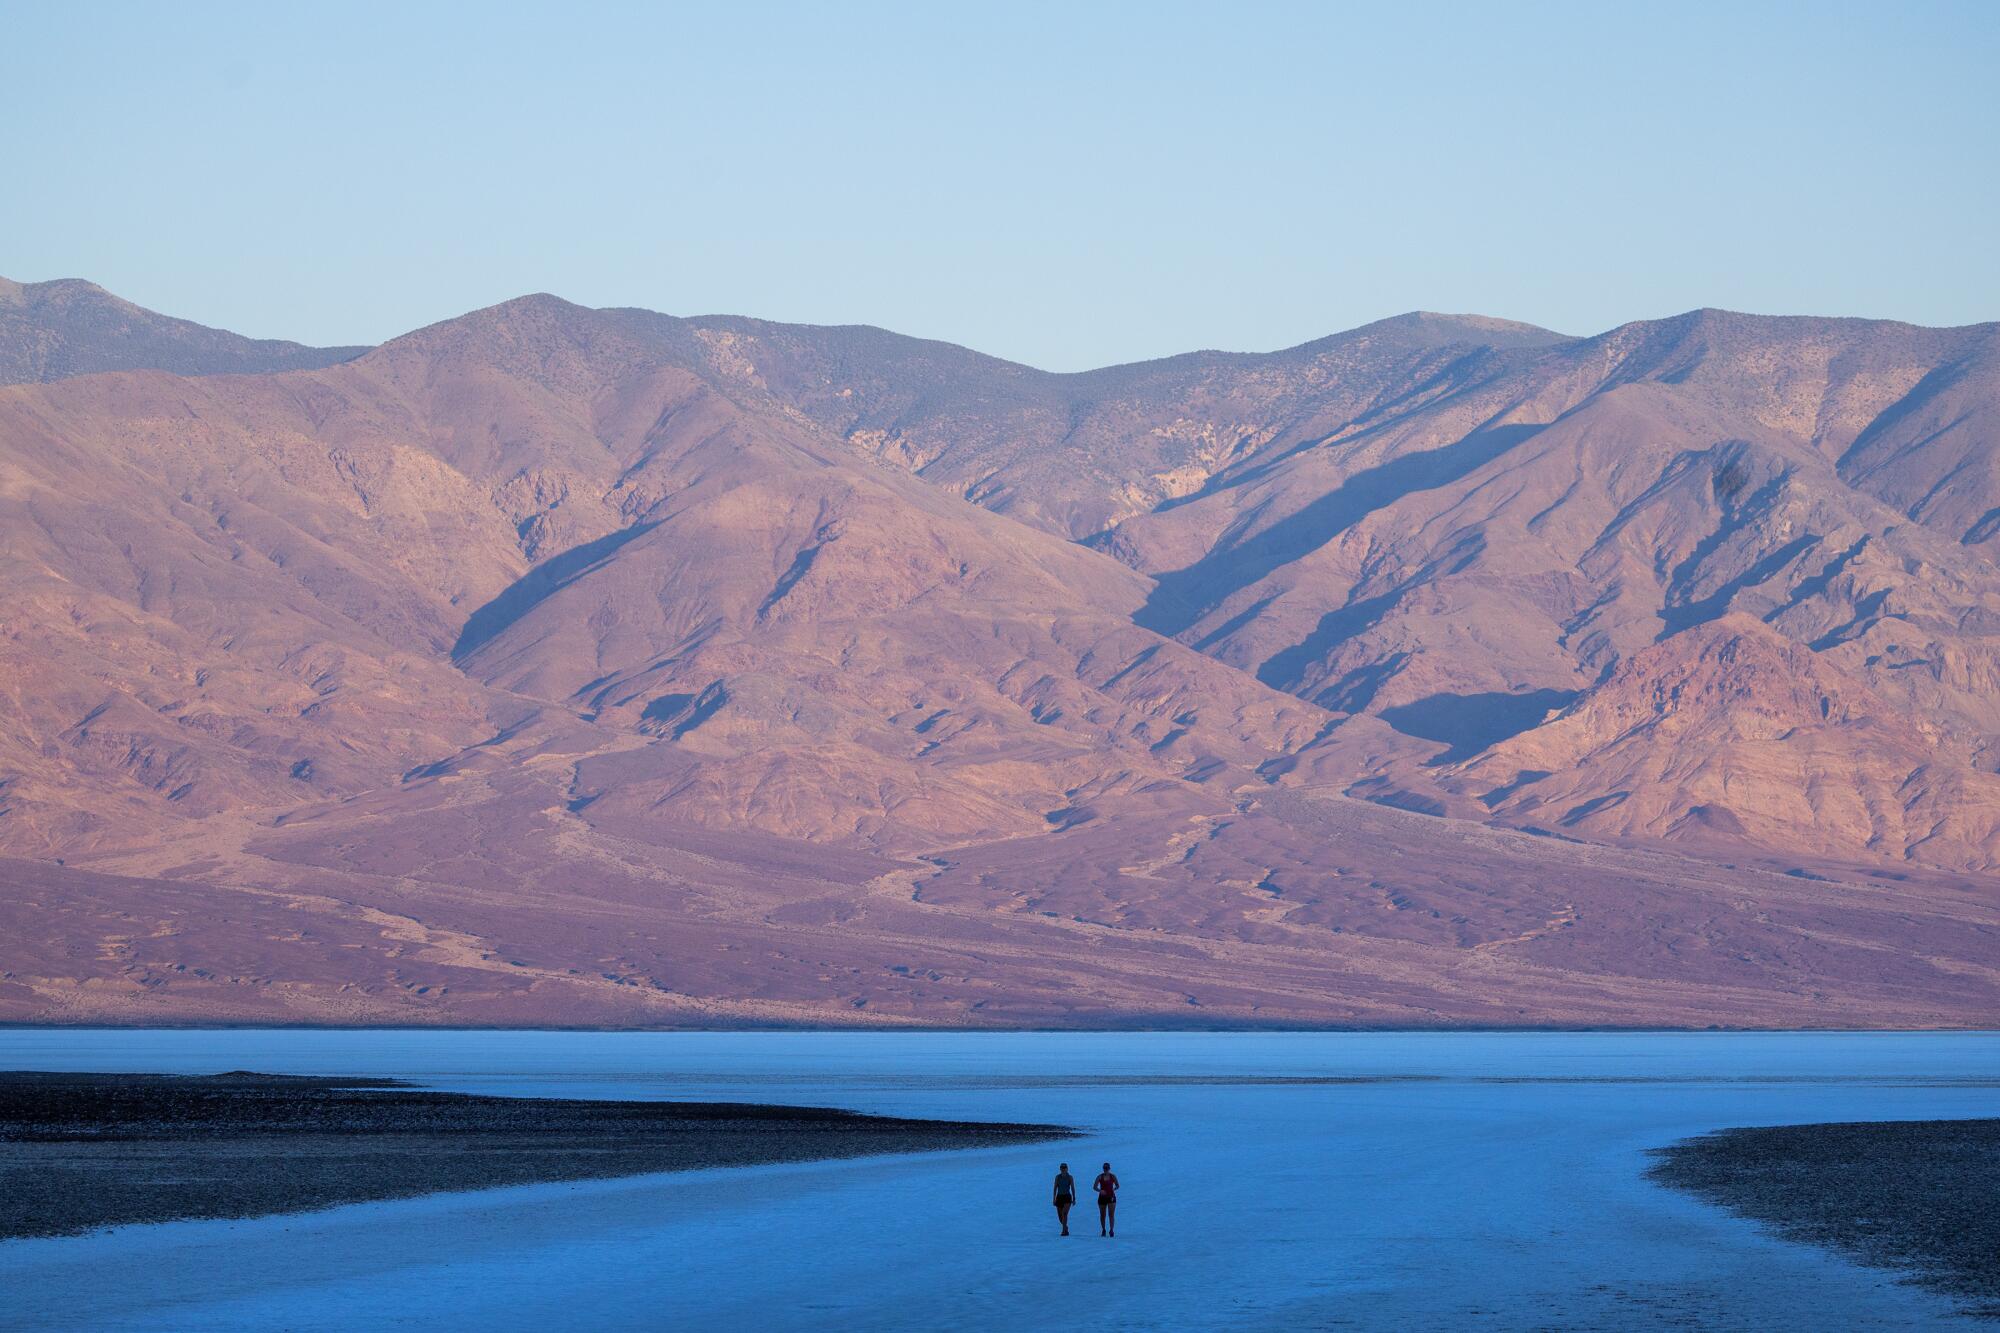 Two figures walk on a salt flat as desert mountains rise in the background.